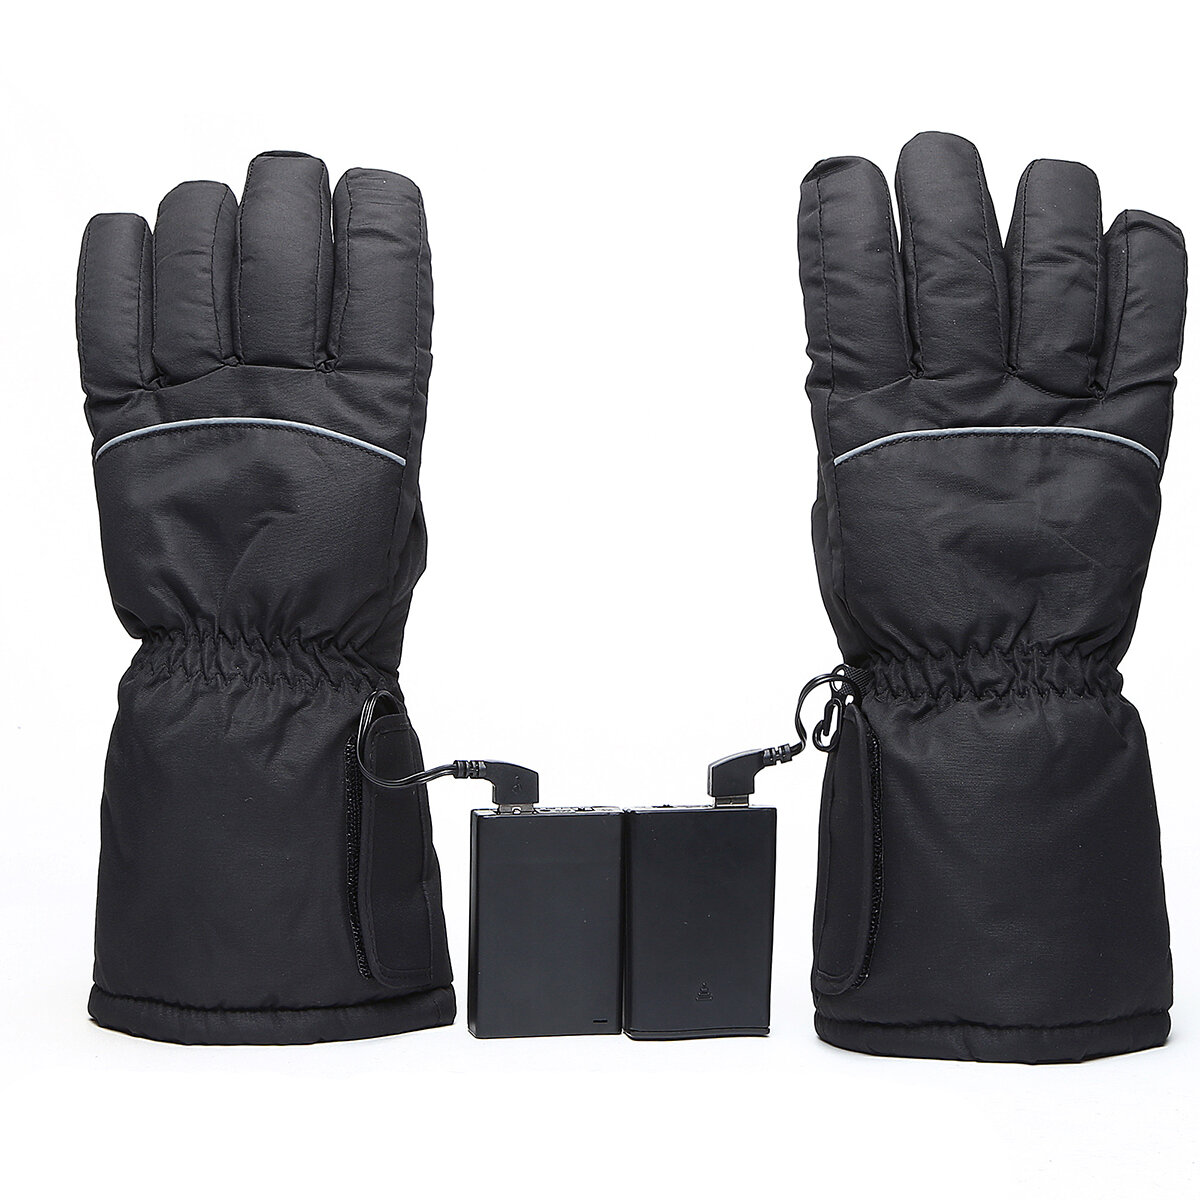 Touch Screen Electric Heated Gloves Warm Waterproof Ski Winter Warmer For Motorcycle Scooter Riding